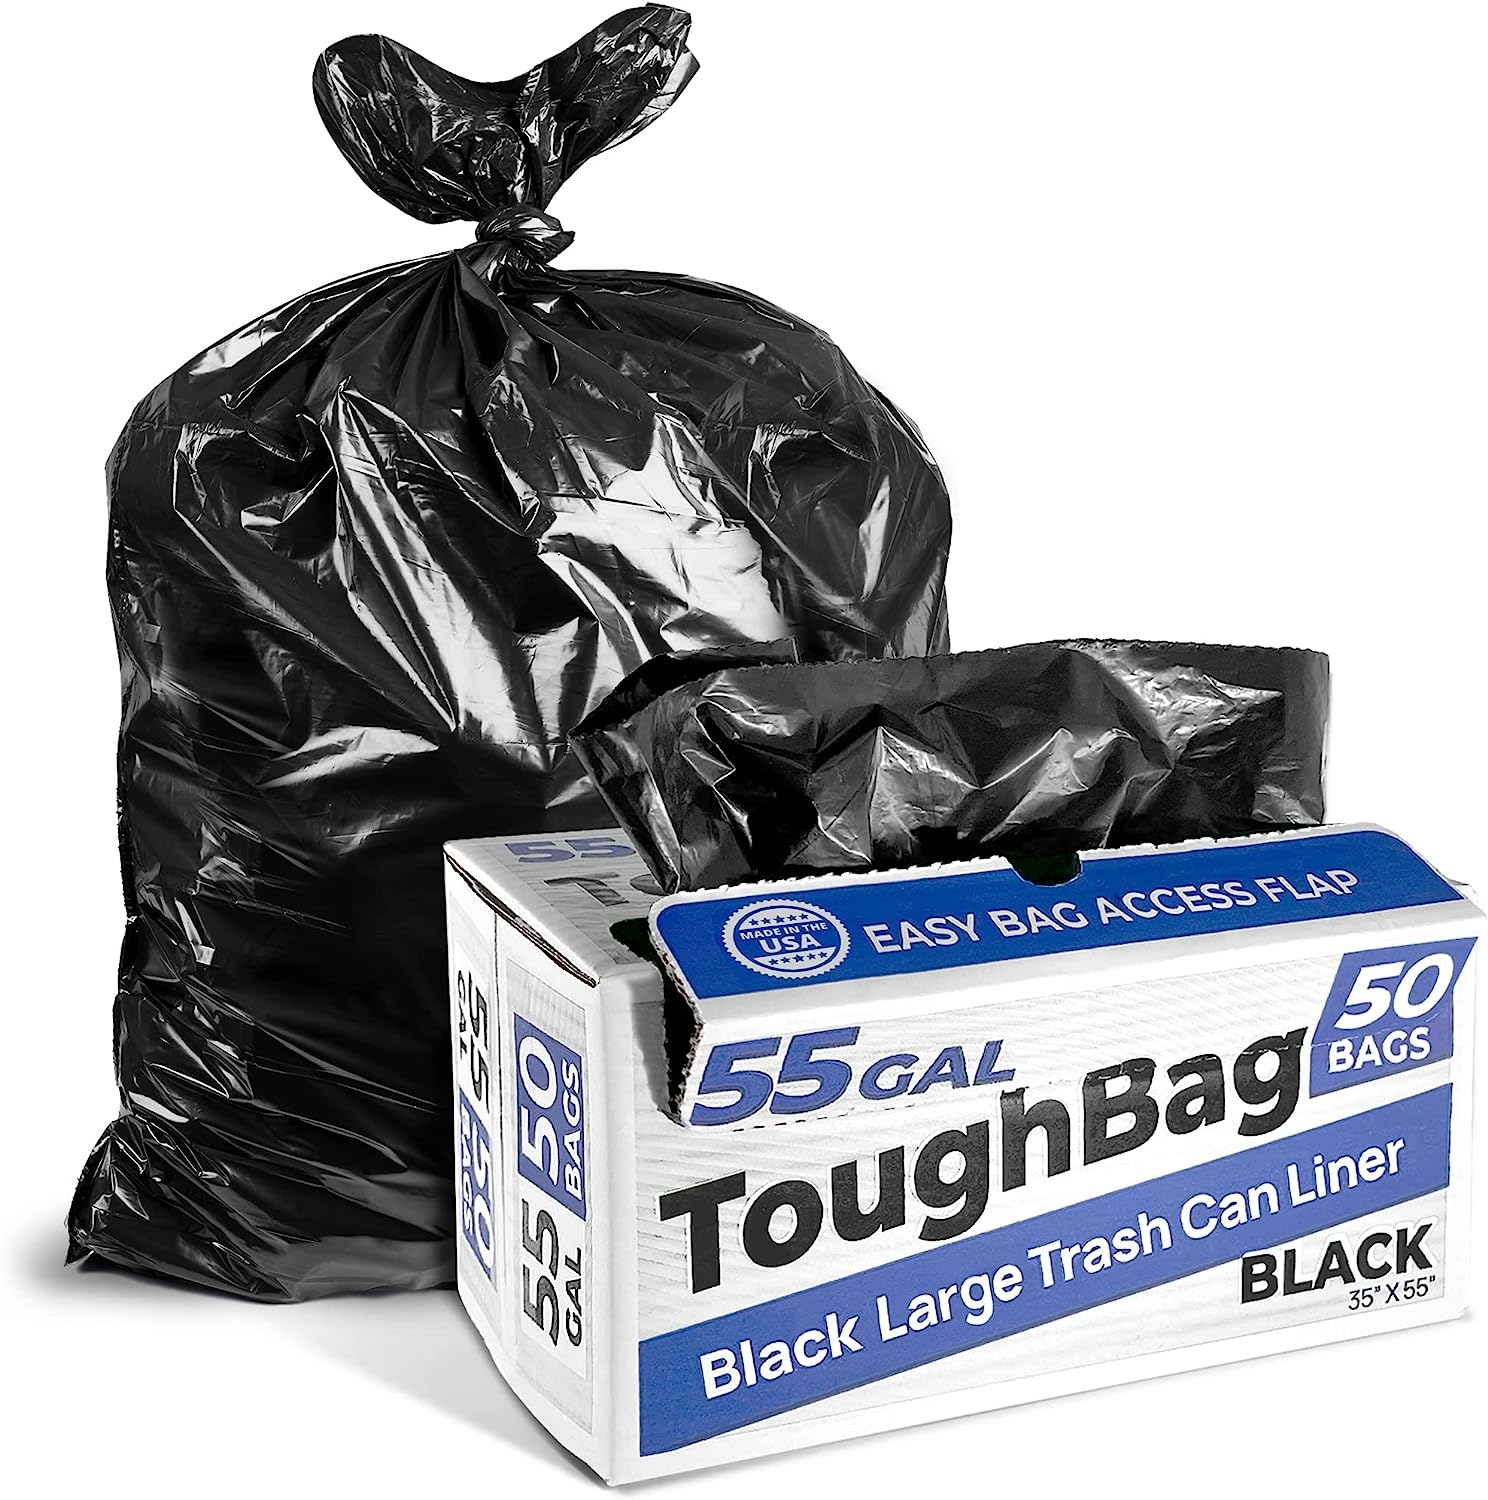 ToughBag 55 Gallon Trash Bags, 35 x 55â€ Large Industrial Black Trash Bags (50 COUNT) – 55-Gallon Outdoor Garbage Bags for